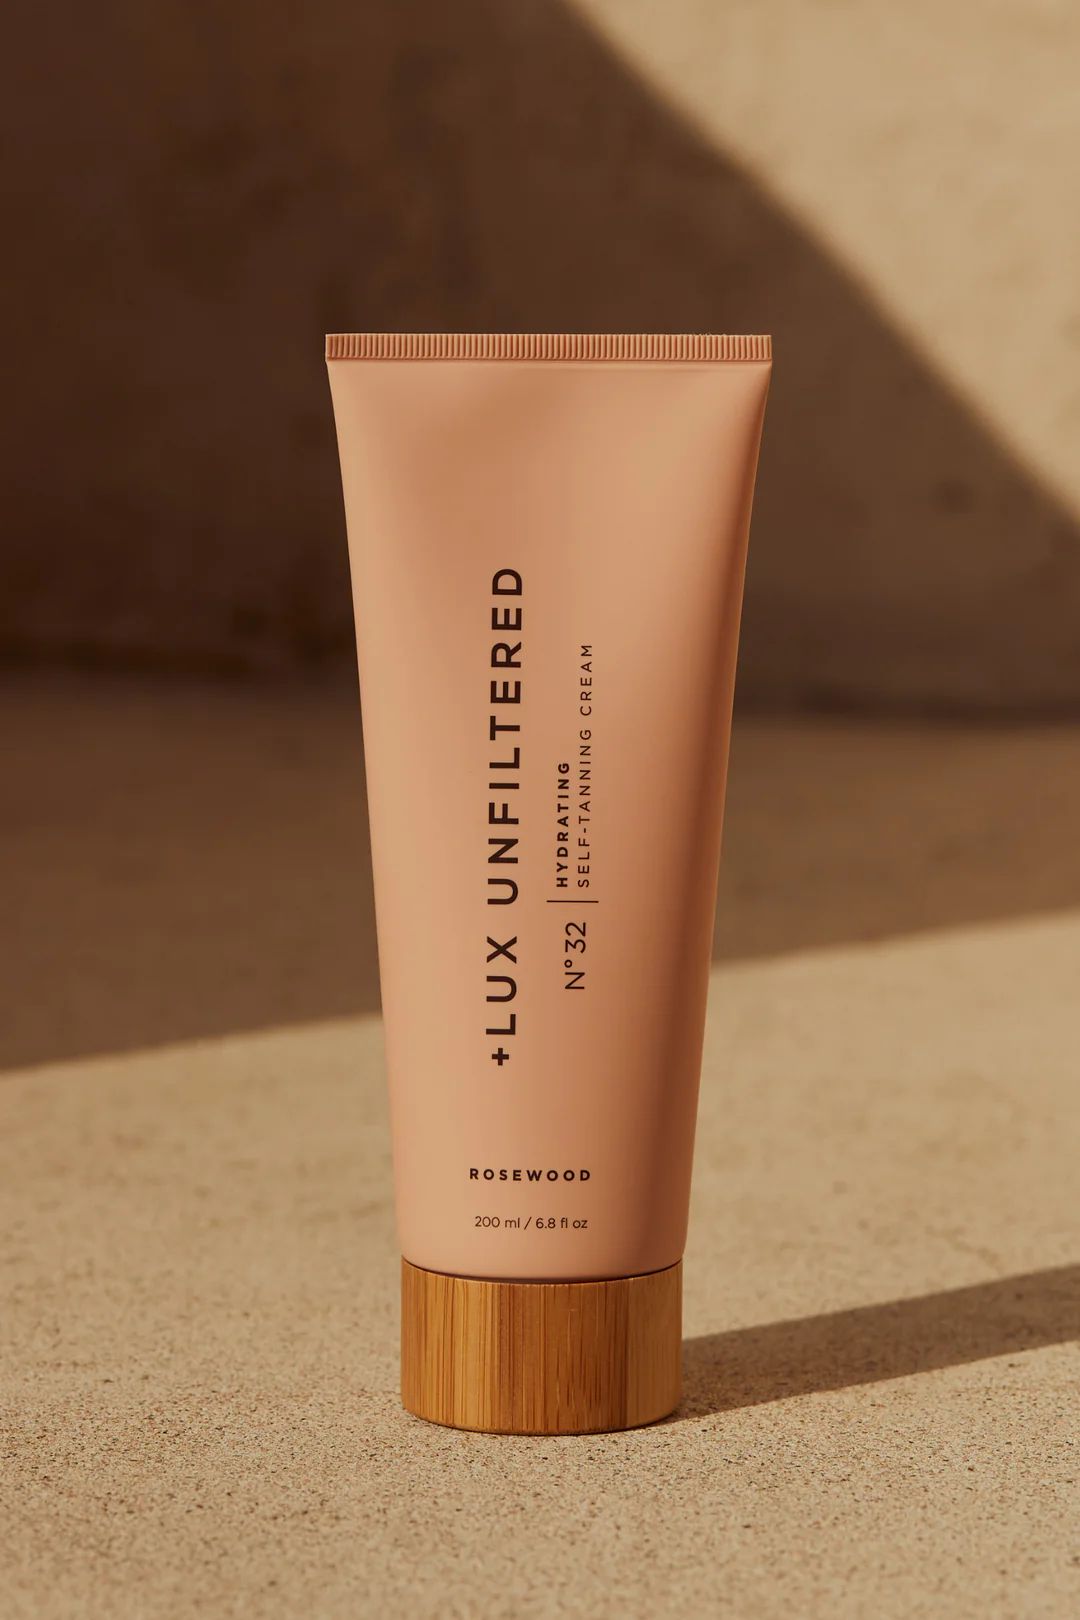 N°32 Original Hydrating Self-Tanning Cream | +Lux Unfiltered